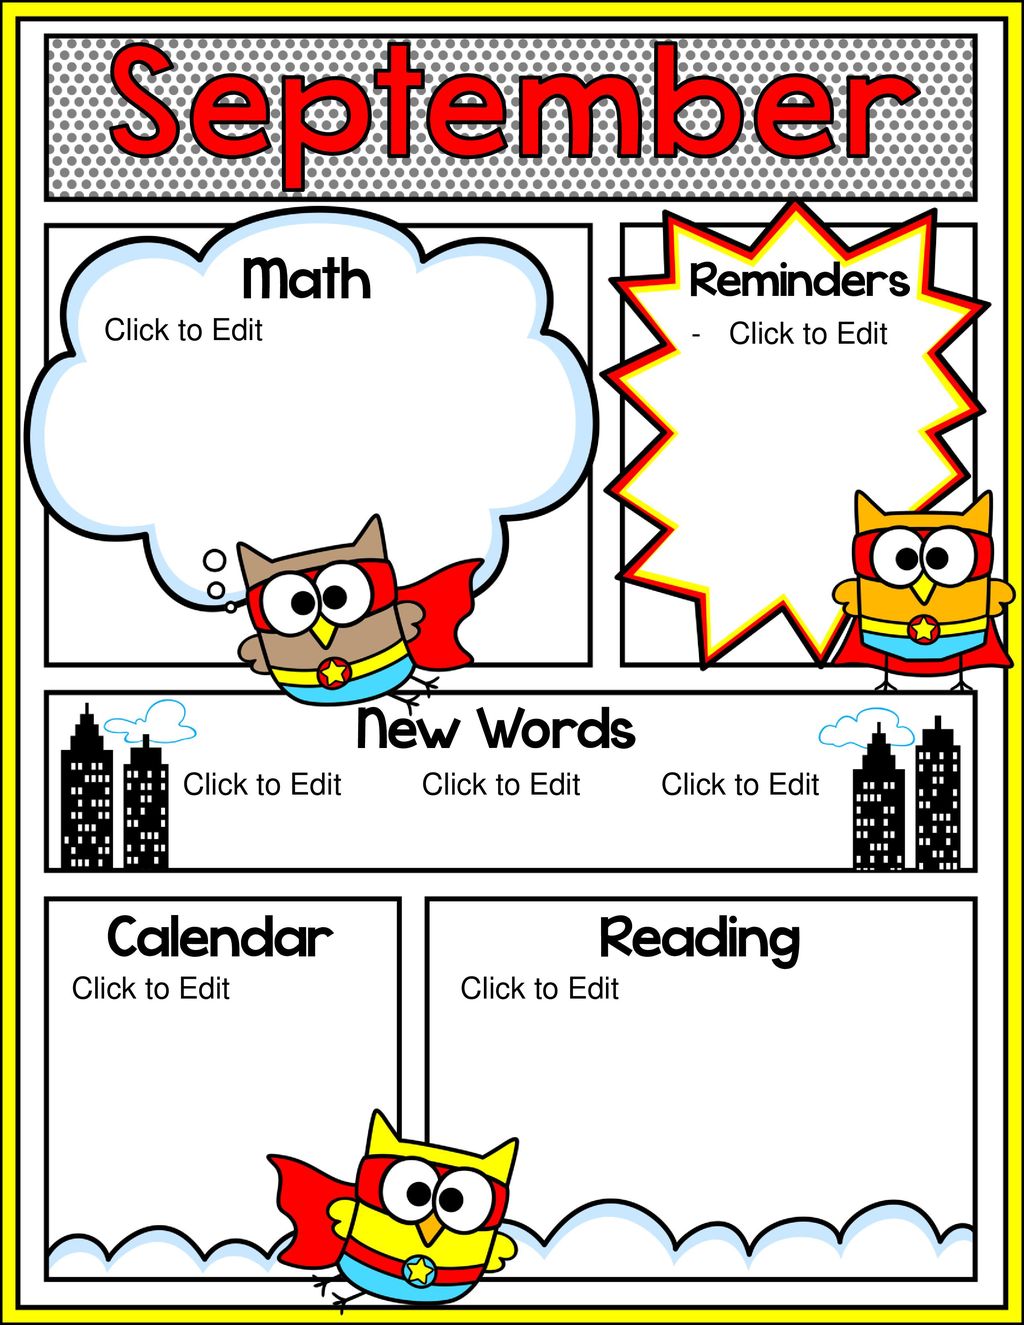 September Math New Words Calendar Reading Reminders Click to Edit